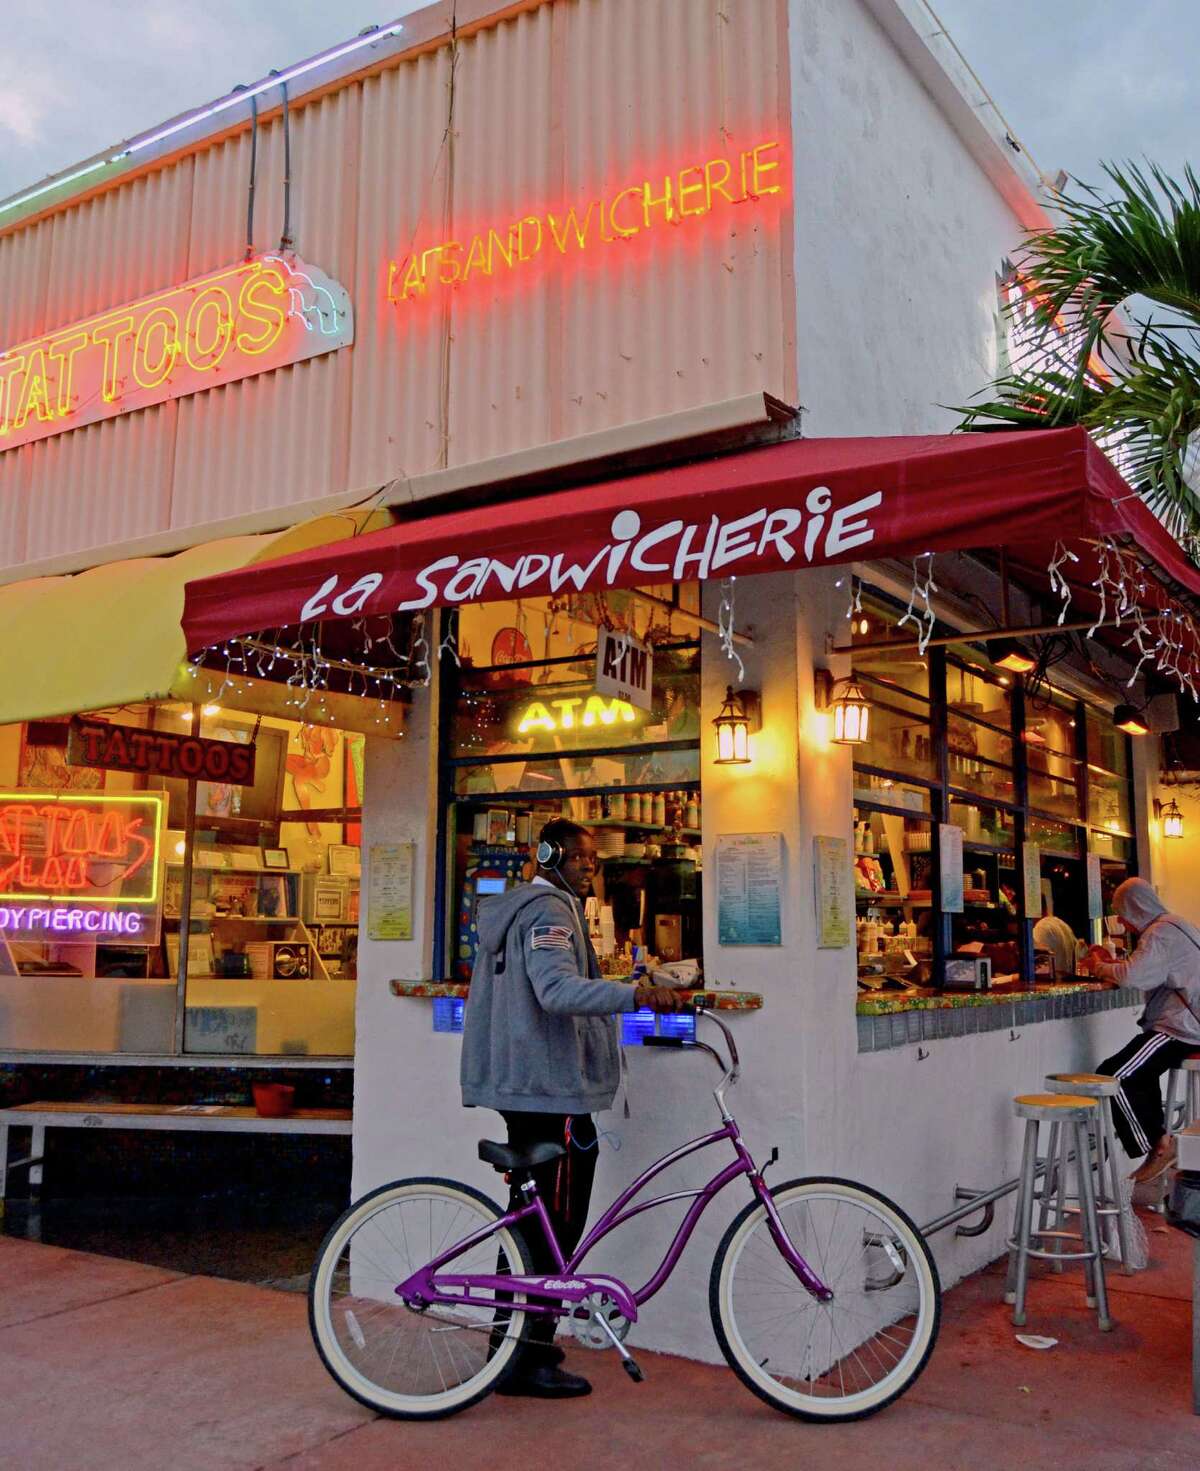 La Sandwicherie is a highlight of South Beach's side streets, where travelers will find inexpensive local favorites for food, accommodations and souvenirs.